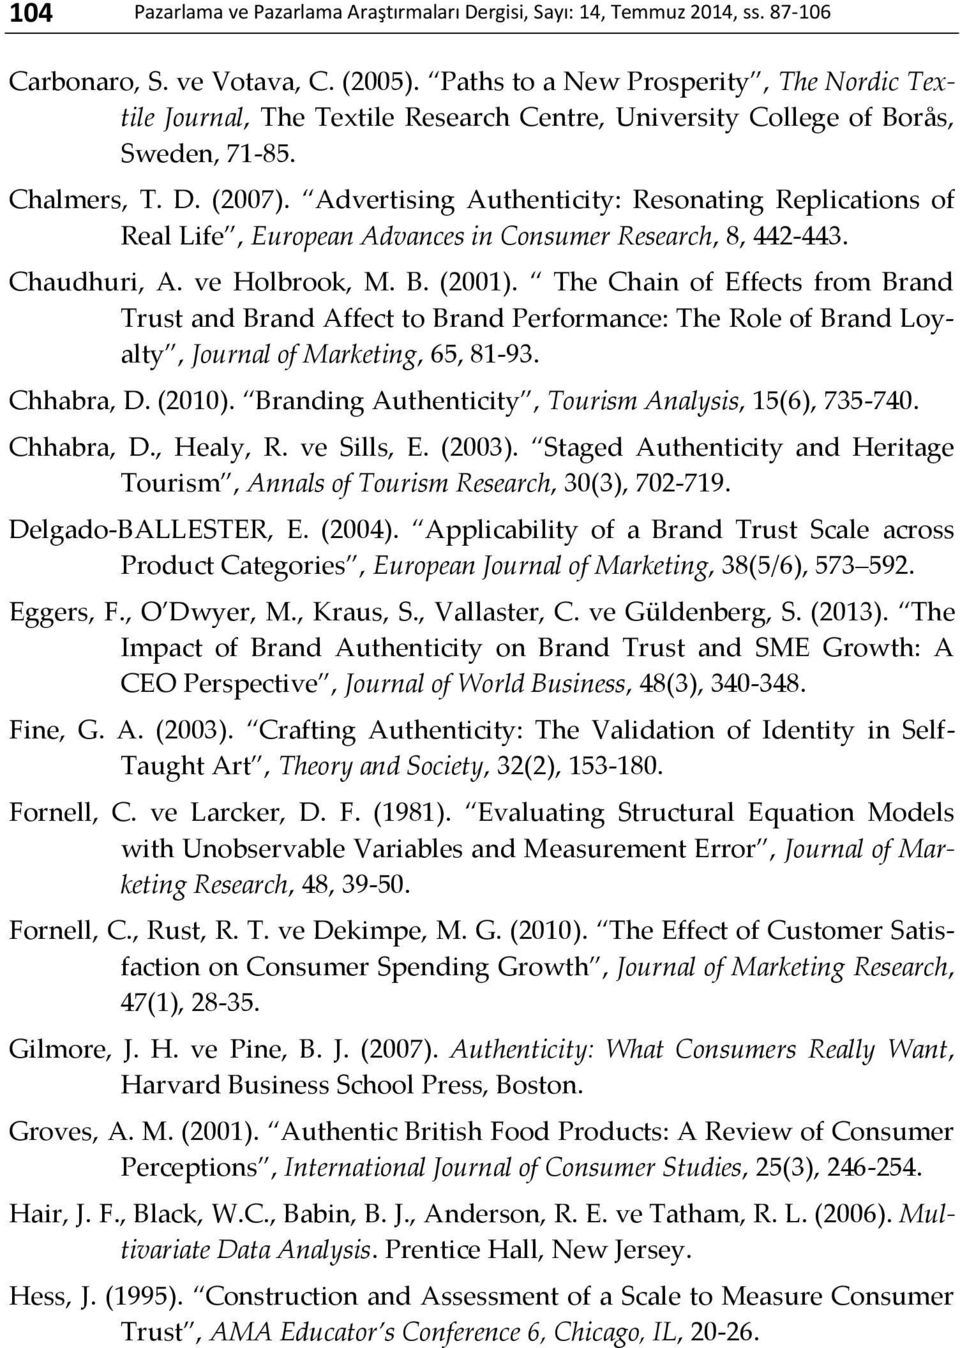 Advertising Authenticity: Resonating Replications of Real Life, European Advances in Consumer Research, 8, 442-443. Chaudhuri, A. ve Holbrook, M. B. (2001).